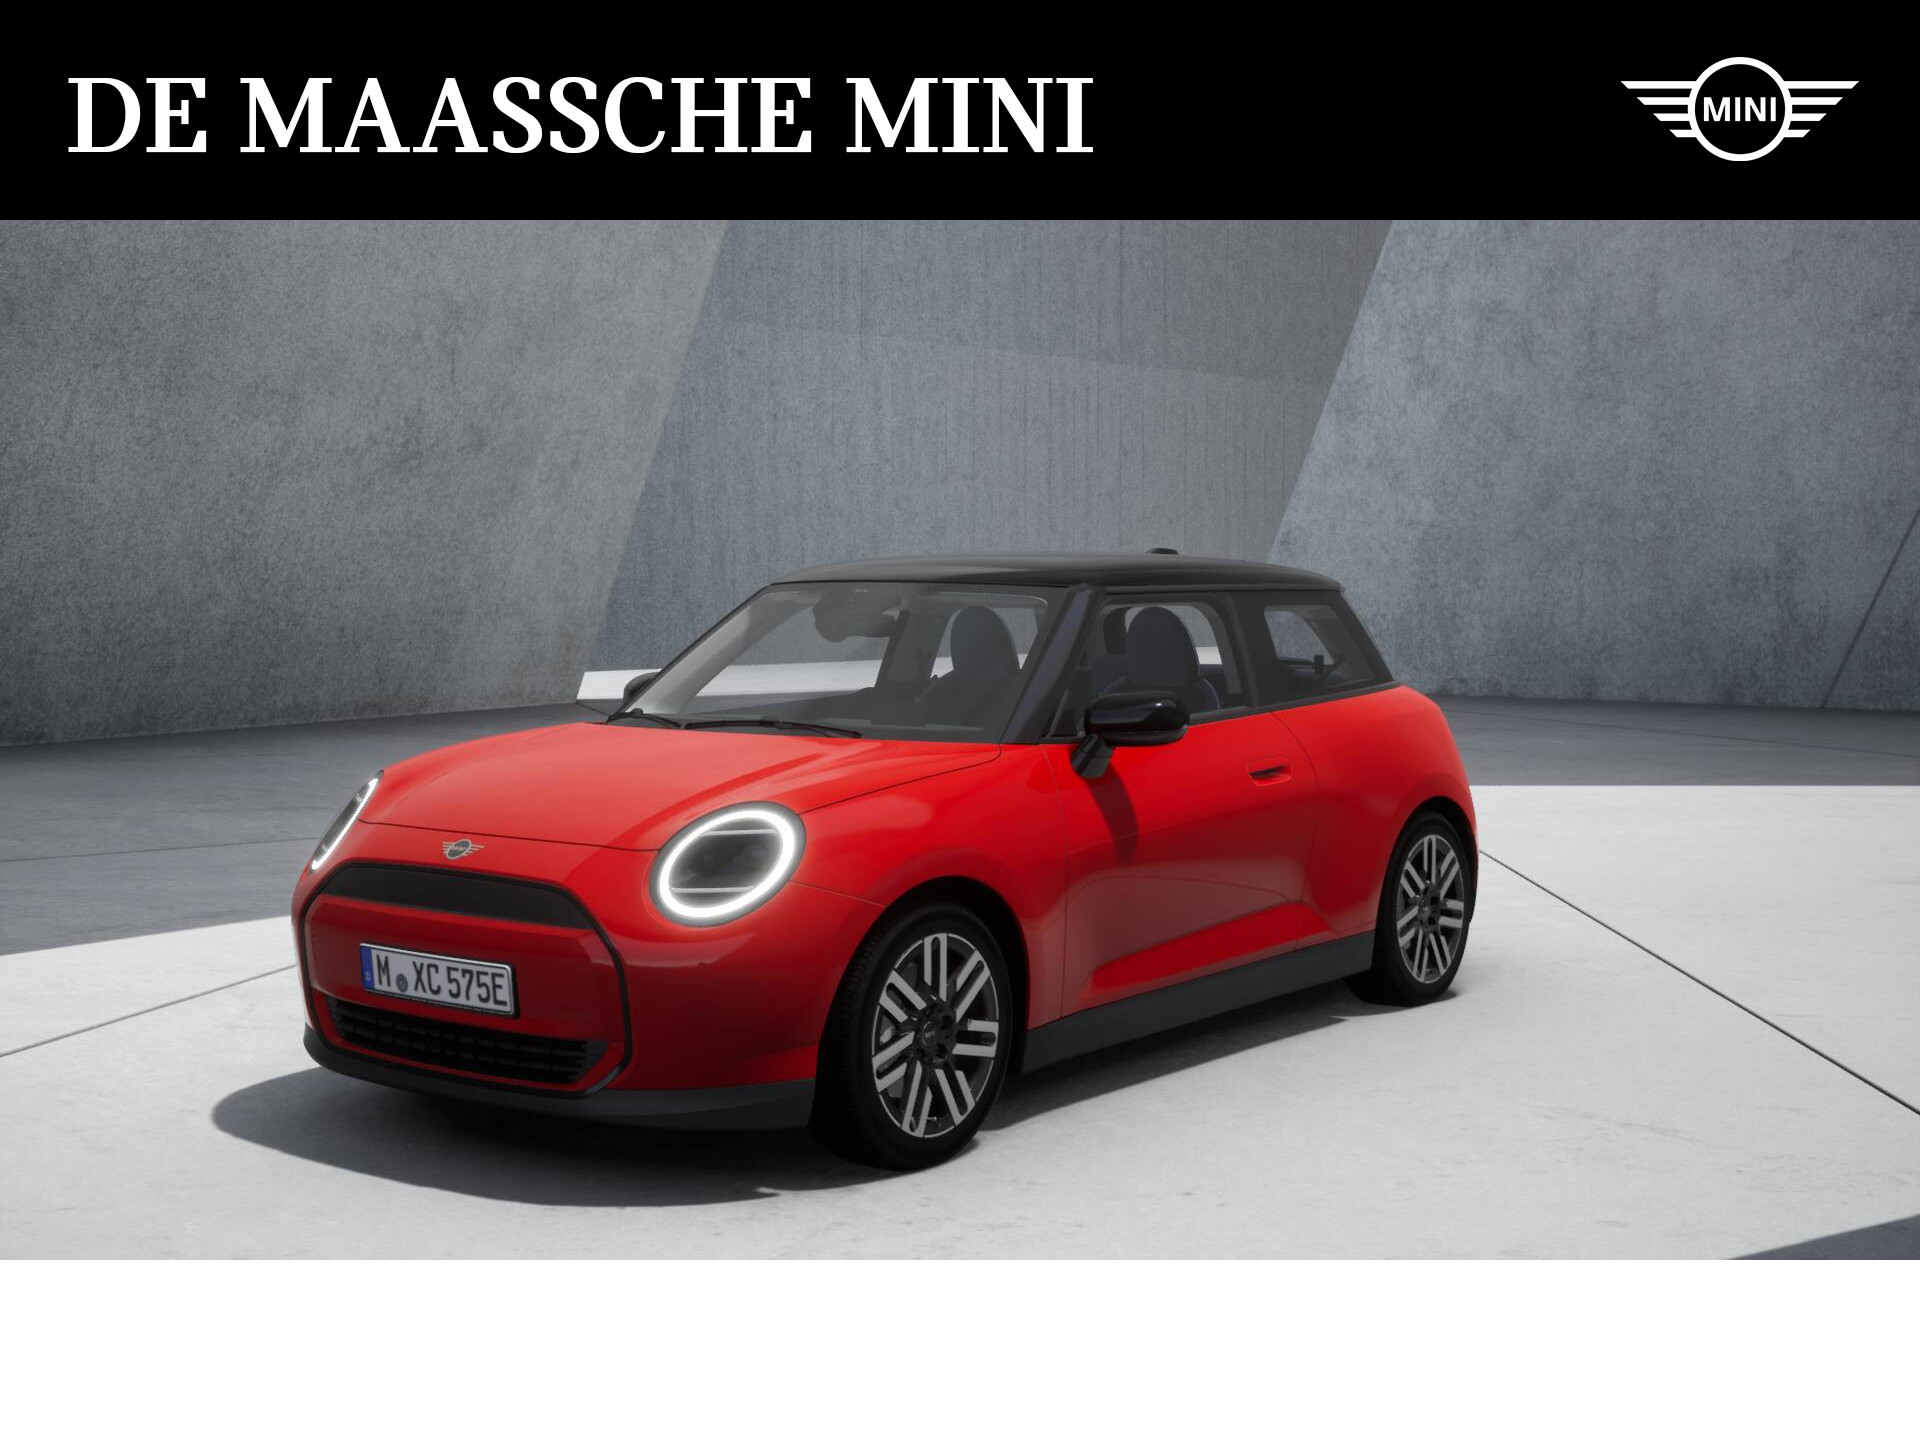 MINI Hatchback Cooper E Classic 40.7 kWh / Comfort Access / LED / Parking Assistant / DAB / Head-Up